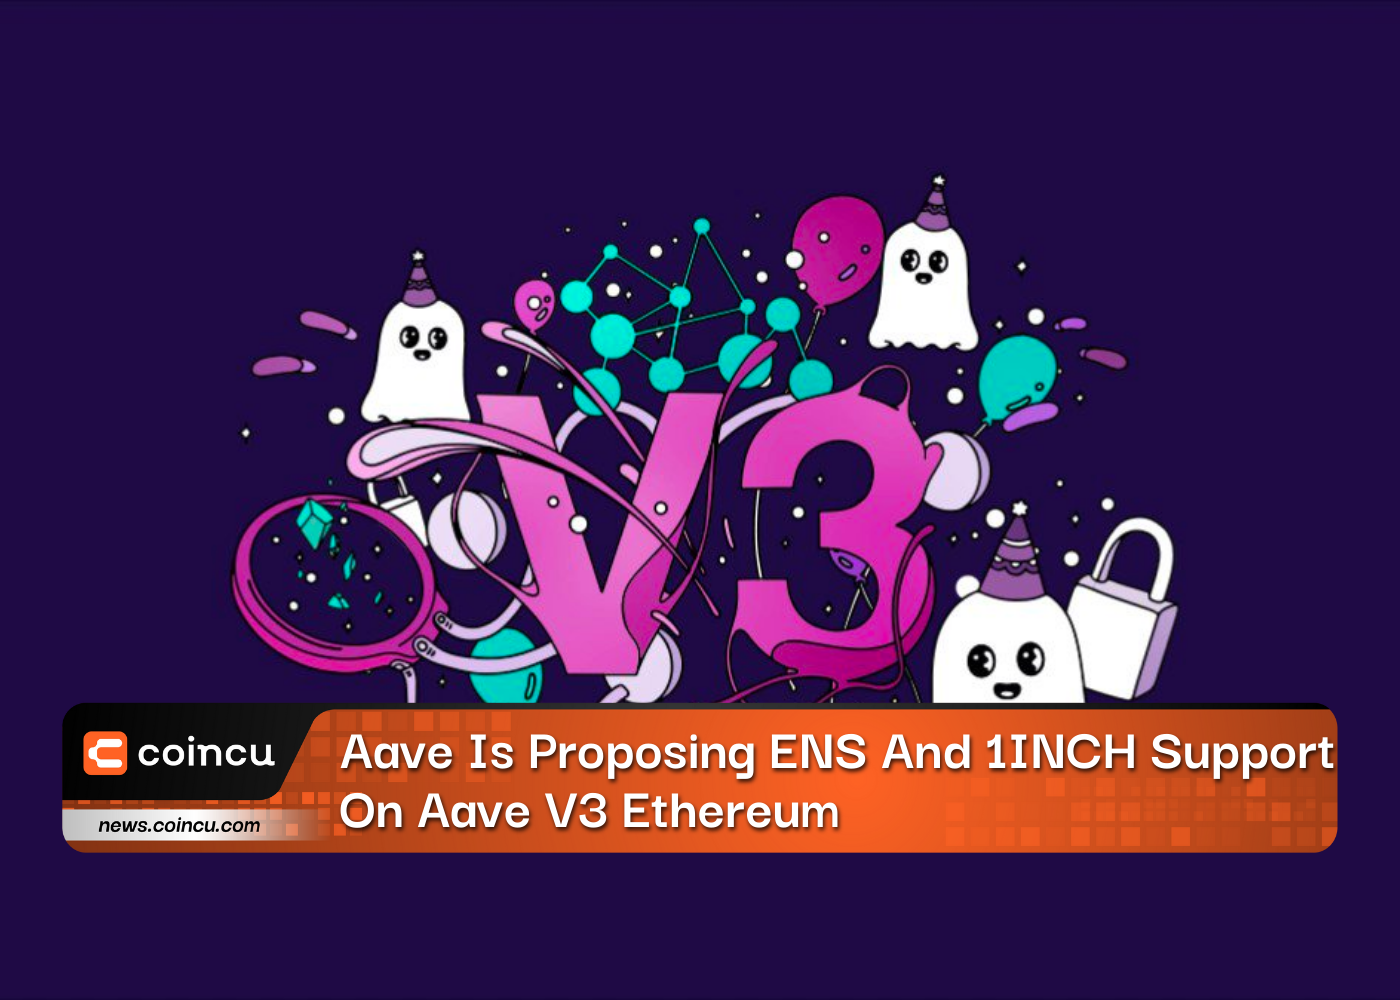 Aave Is Proposing ENS And 1INCH Support On Aave V3 Ethereum